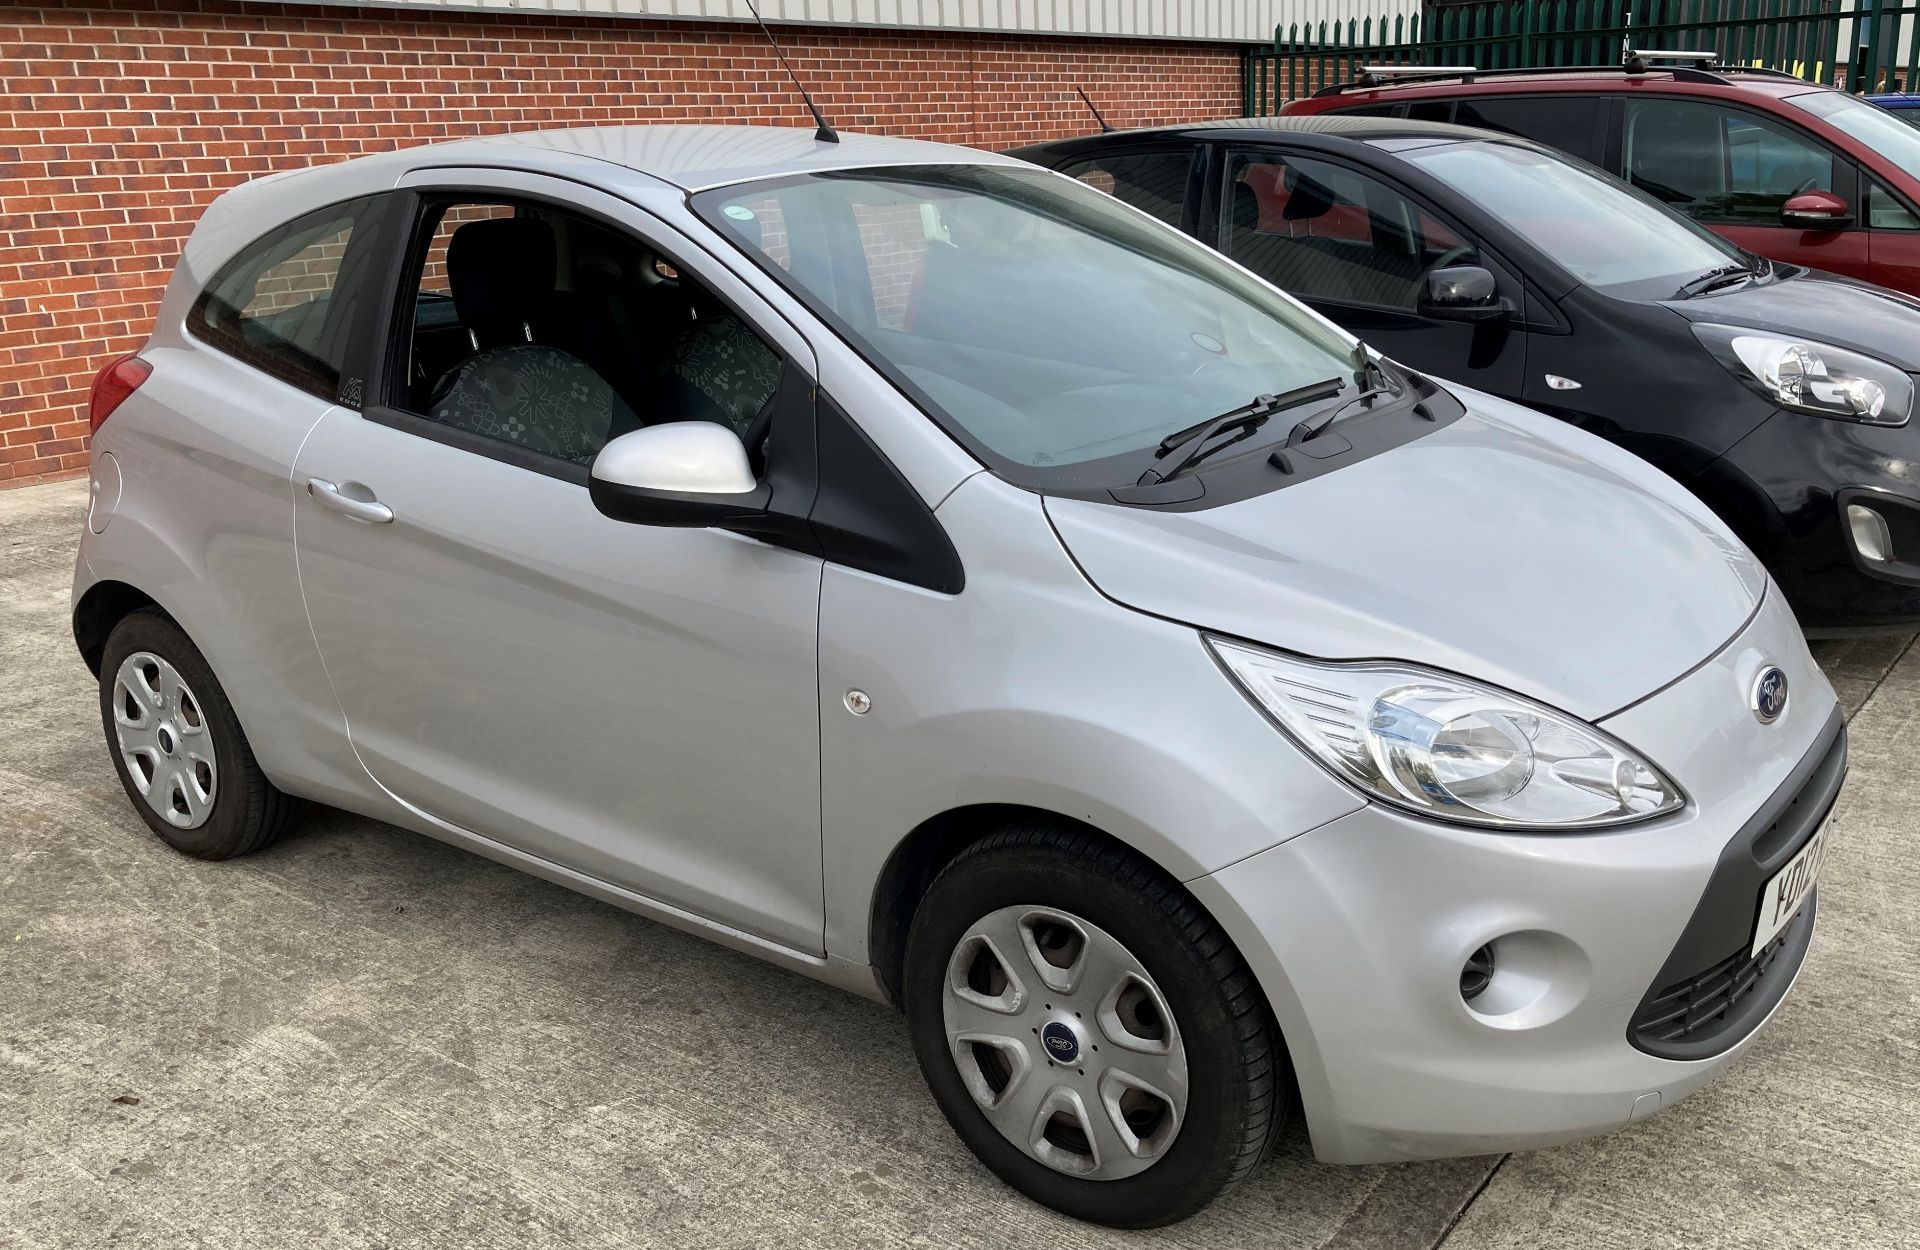 FORD KA EDGE 1.2 3 DOOR HATCHBACK - Petrol - Silver - Nextbase front and rear dashcams fitted.